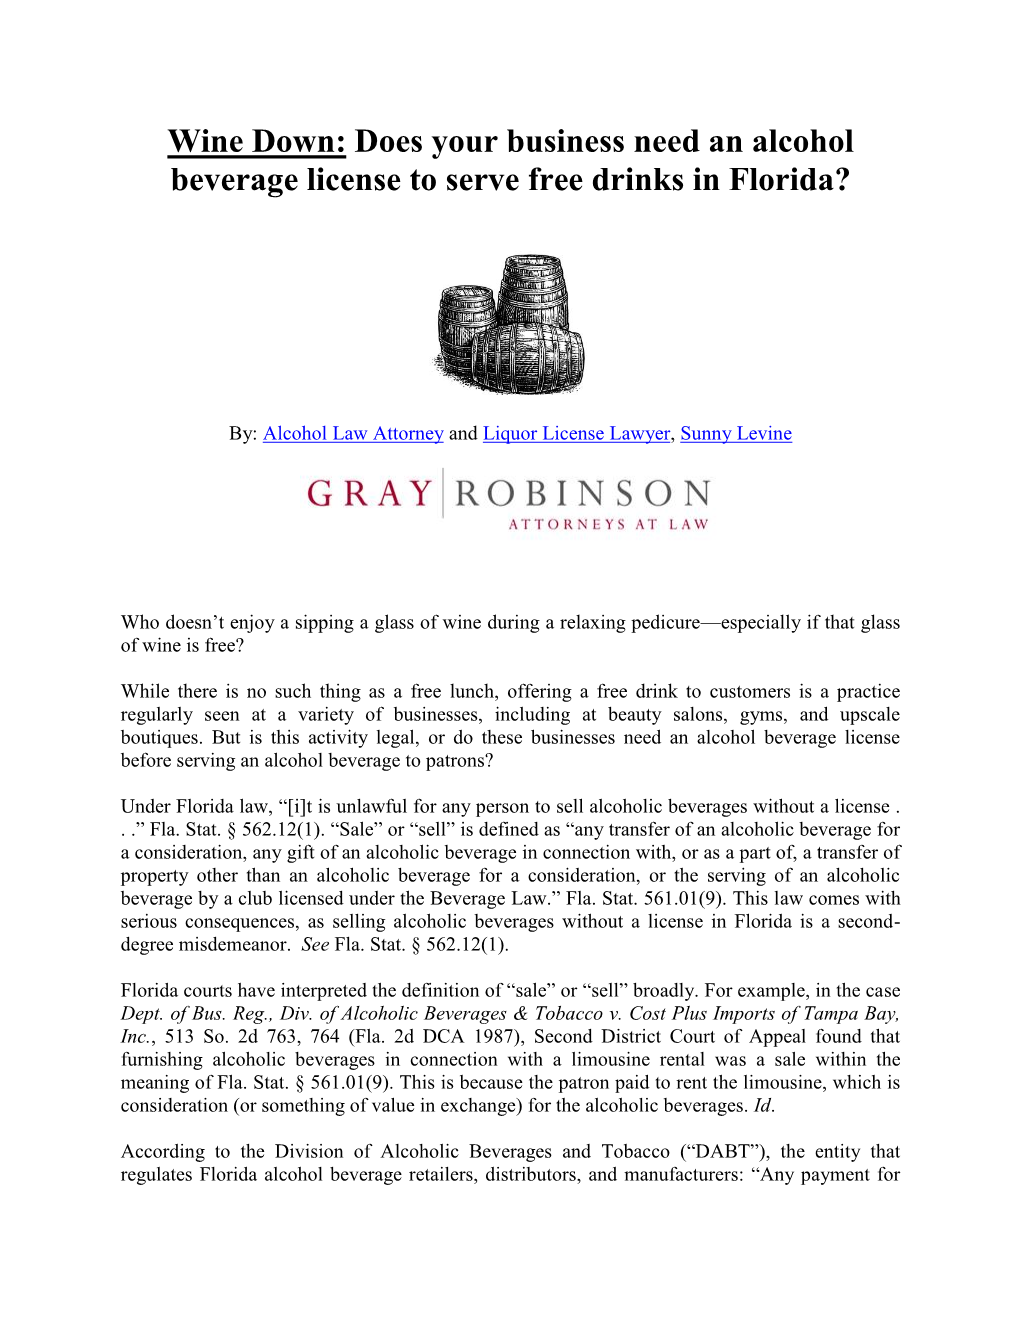 Does Your Business Need an Alcohol Beverage License to Serve Free Drinks in Florida?